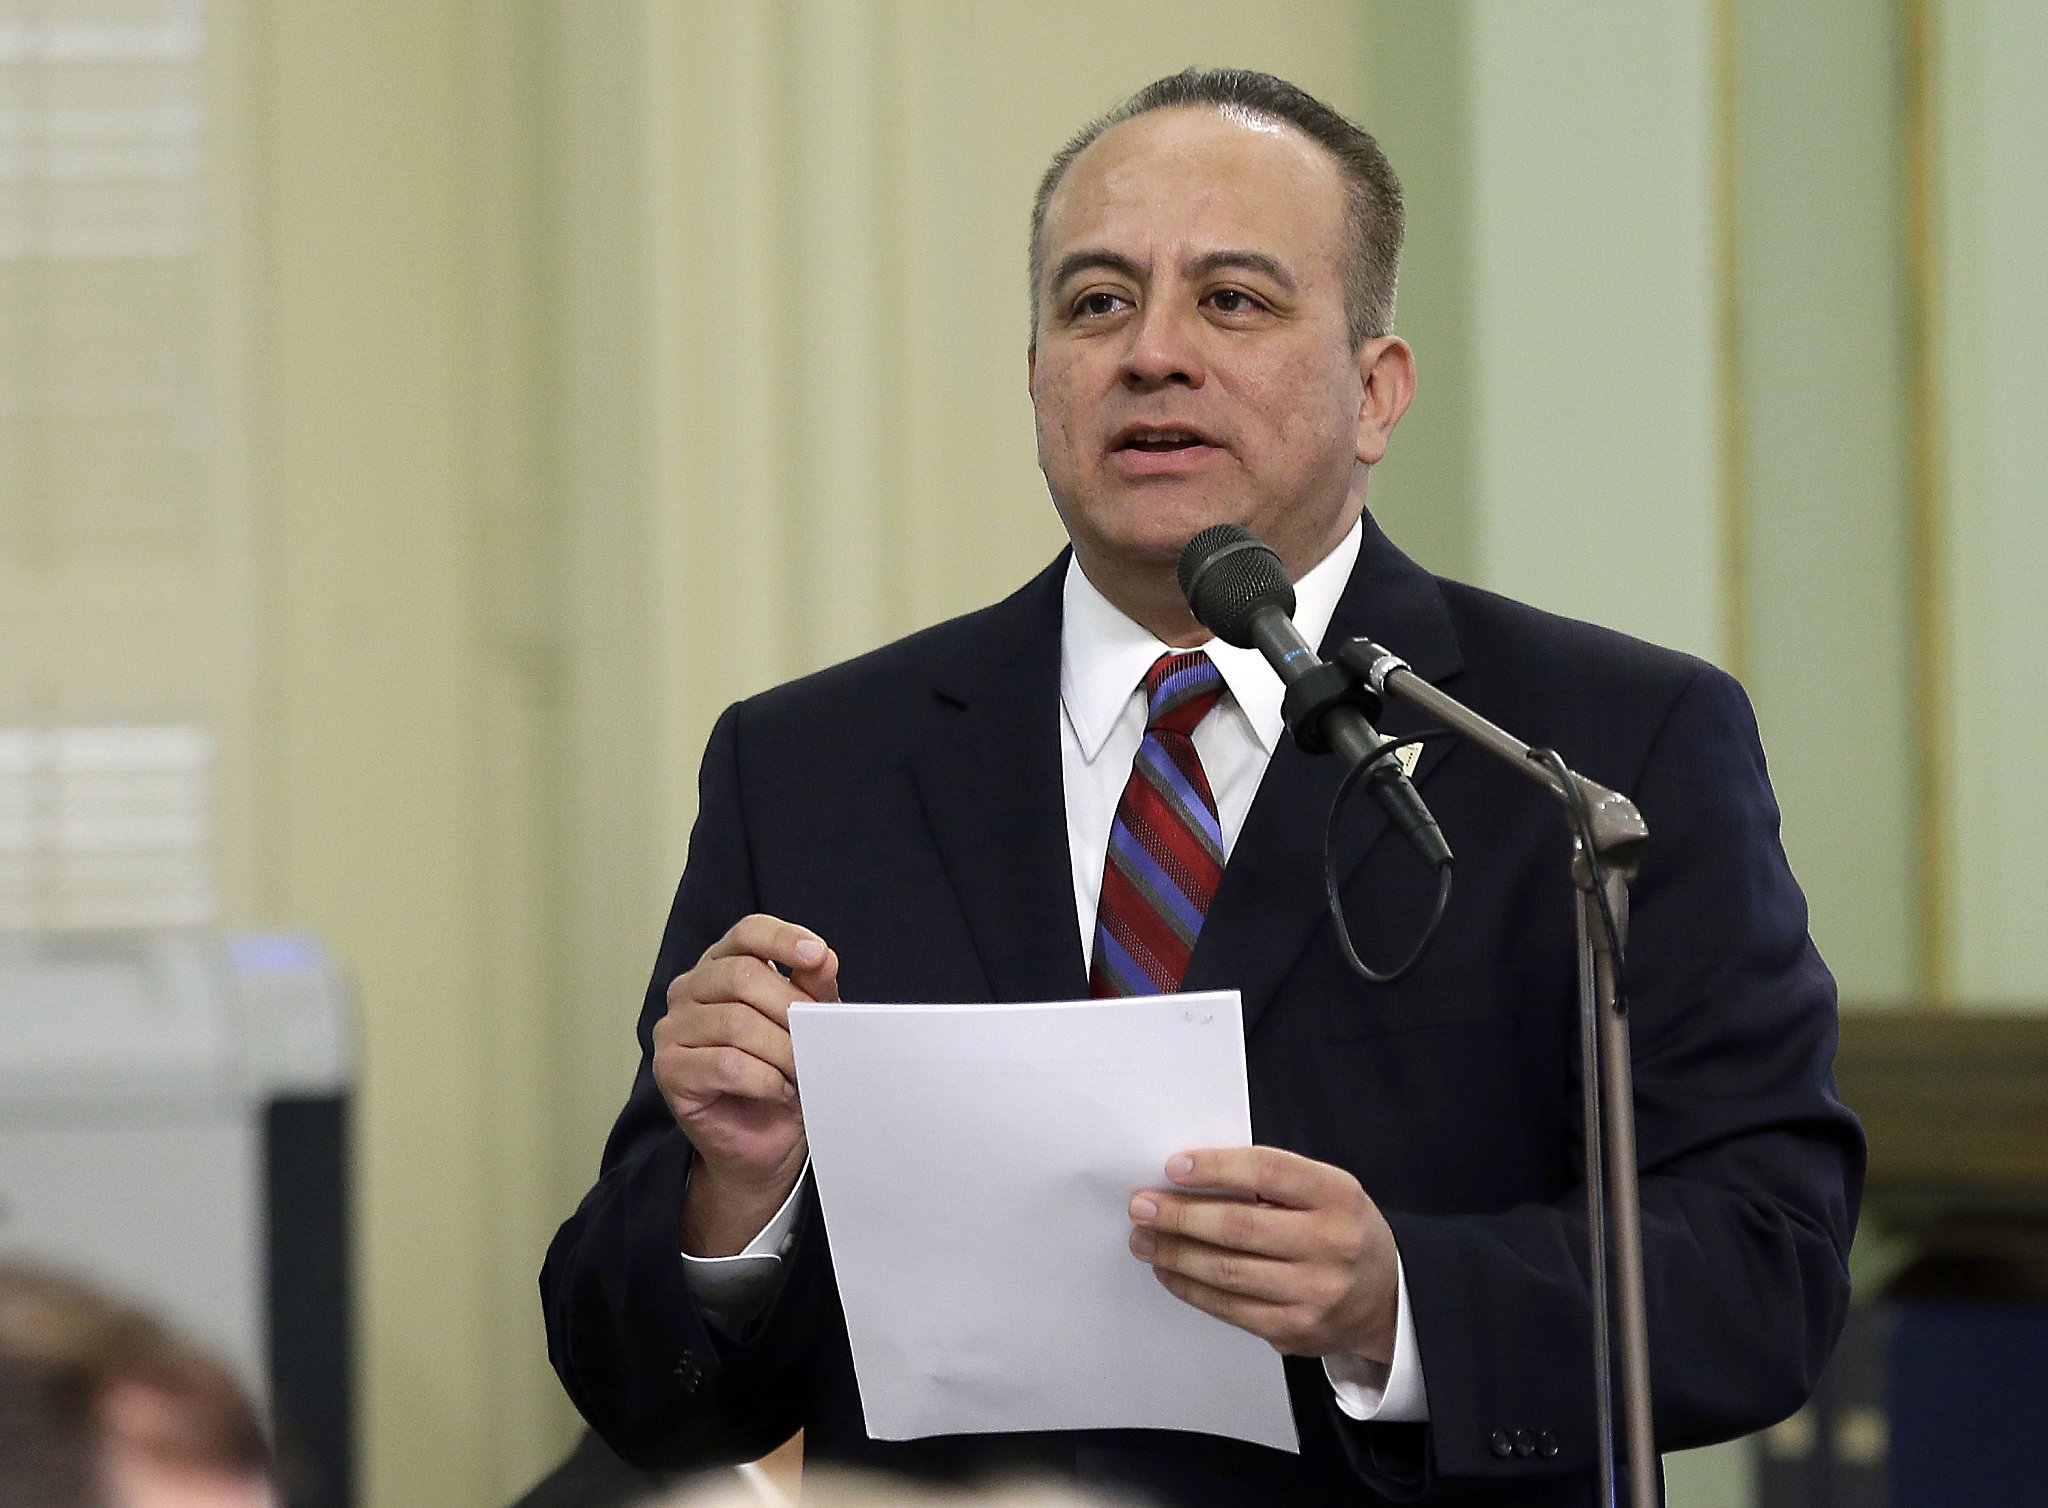 Assembly probe finds Raul Bocanegra sexually harassed 3 workers